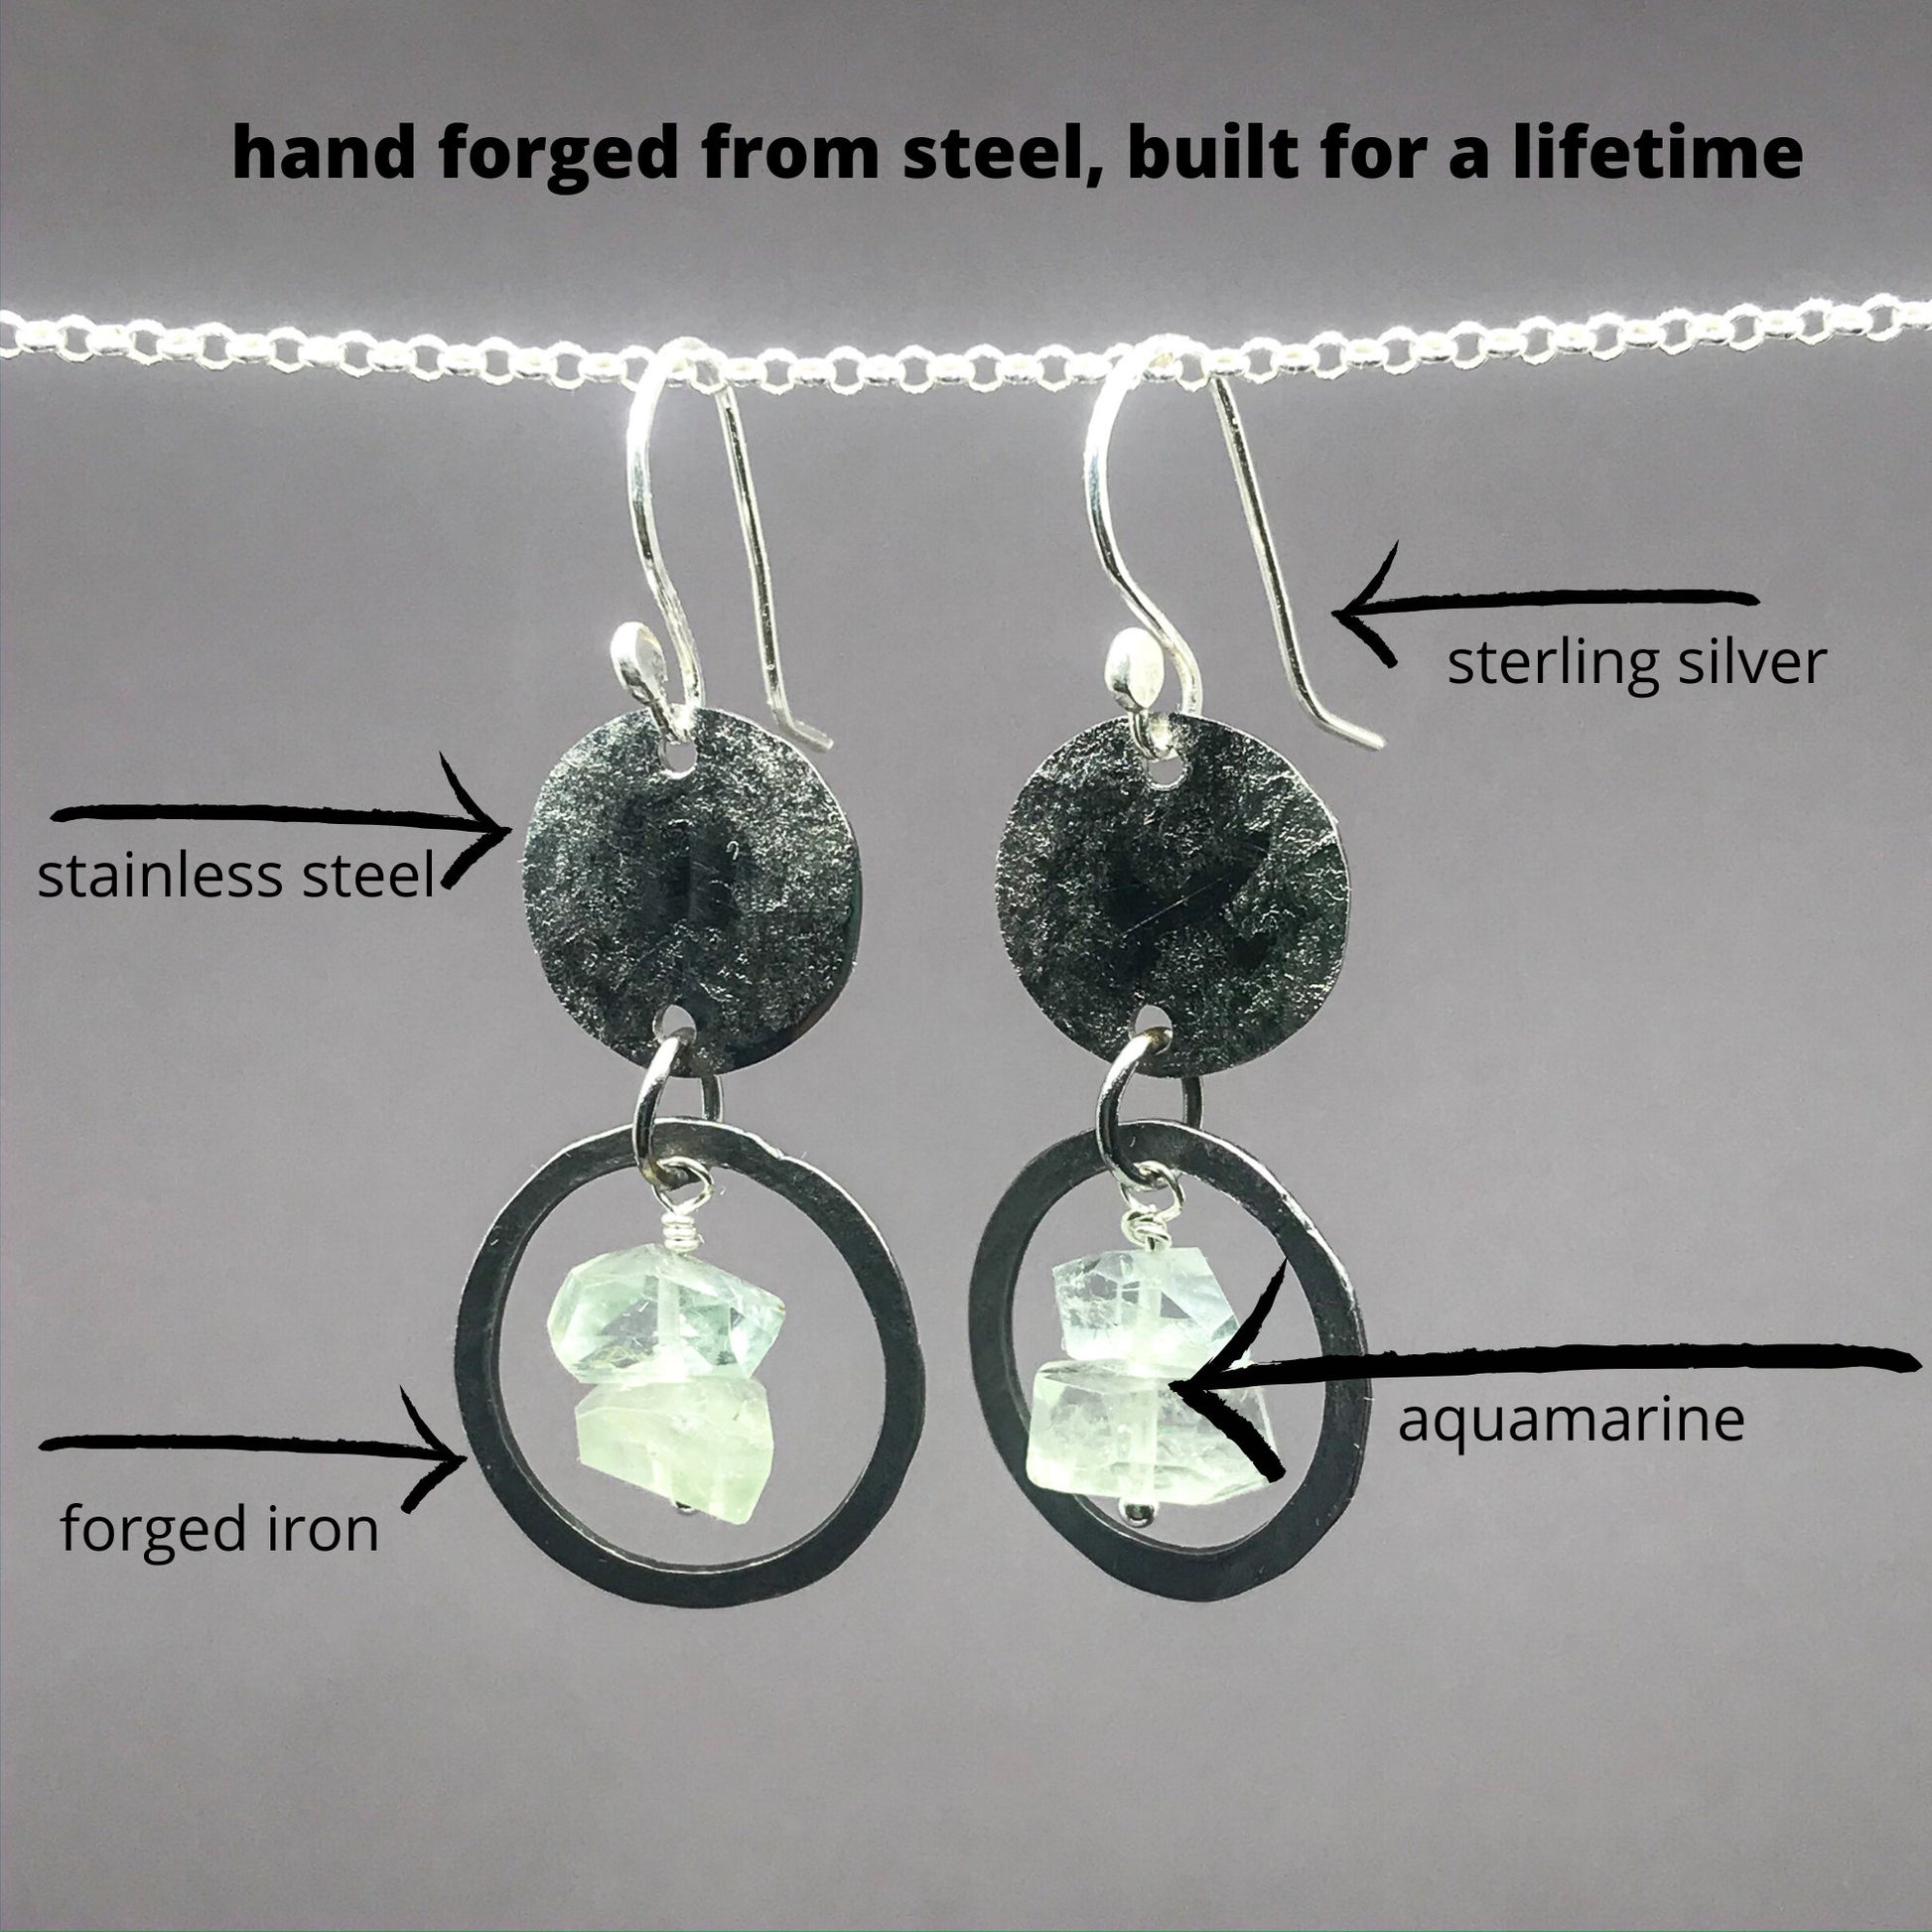 diagram of stainless steel earrings with each part identified by material and gemstone